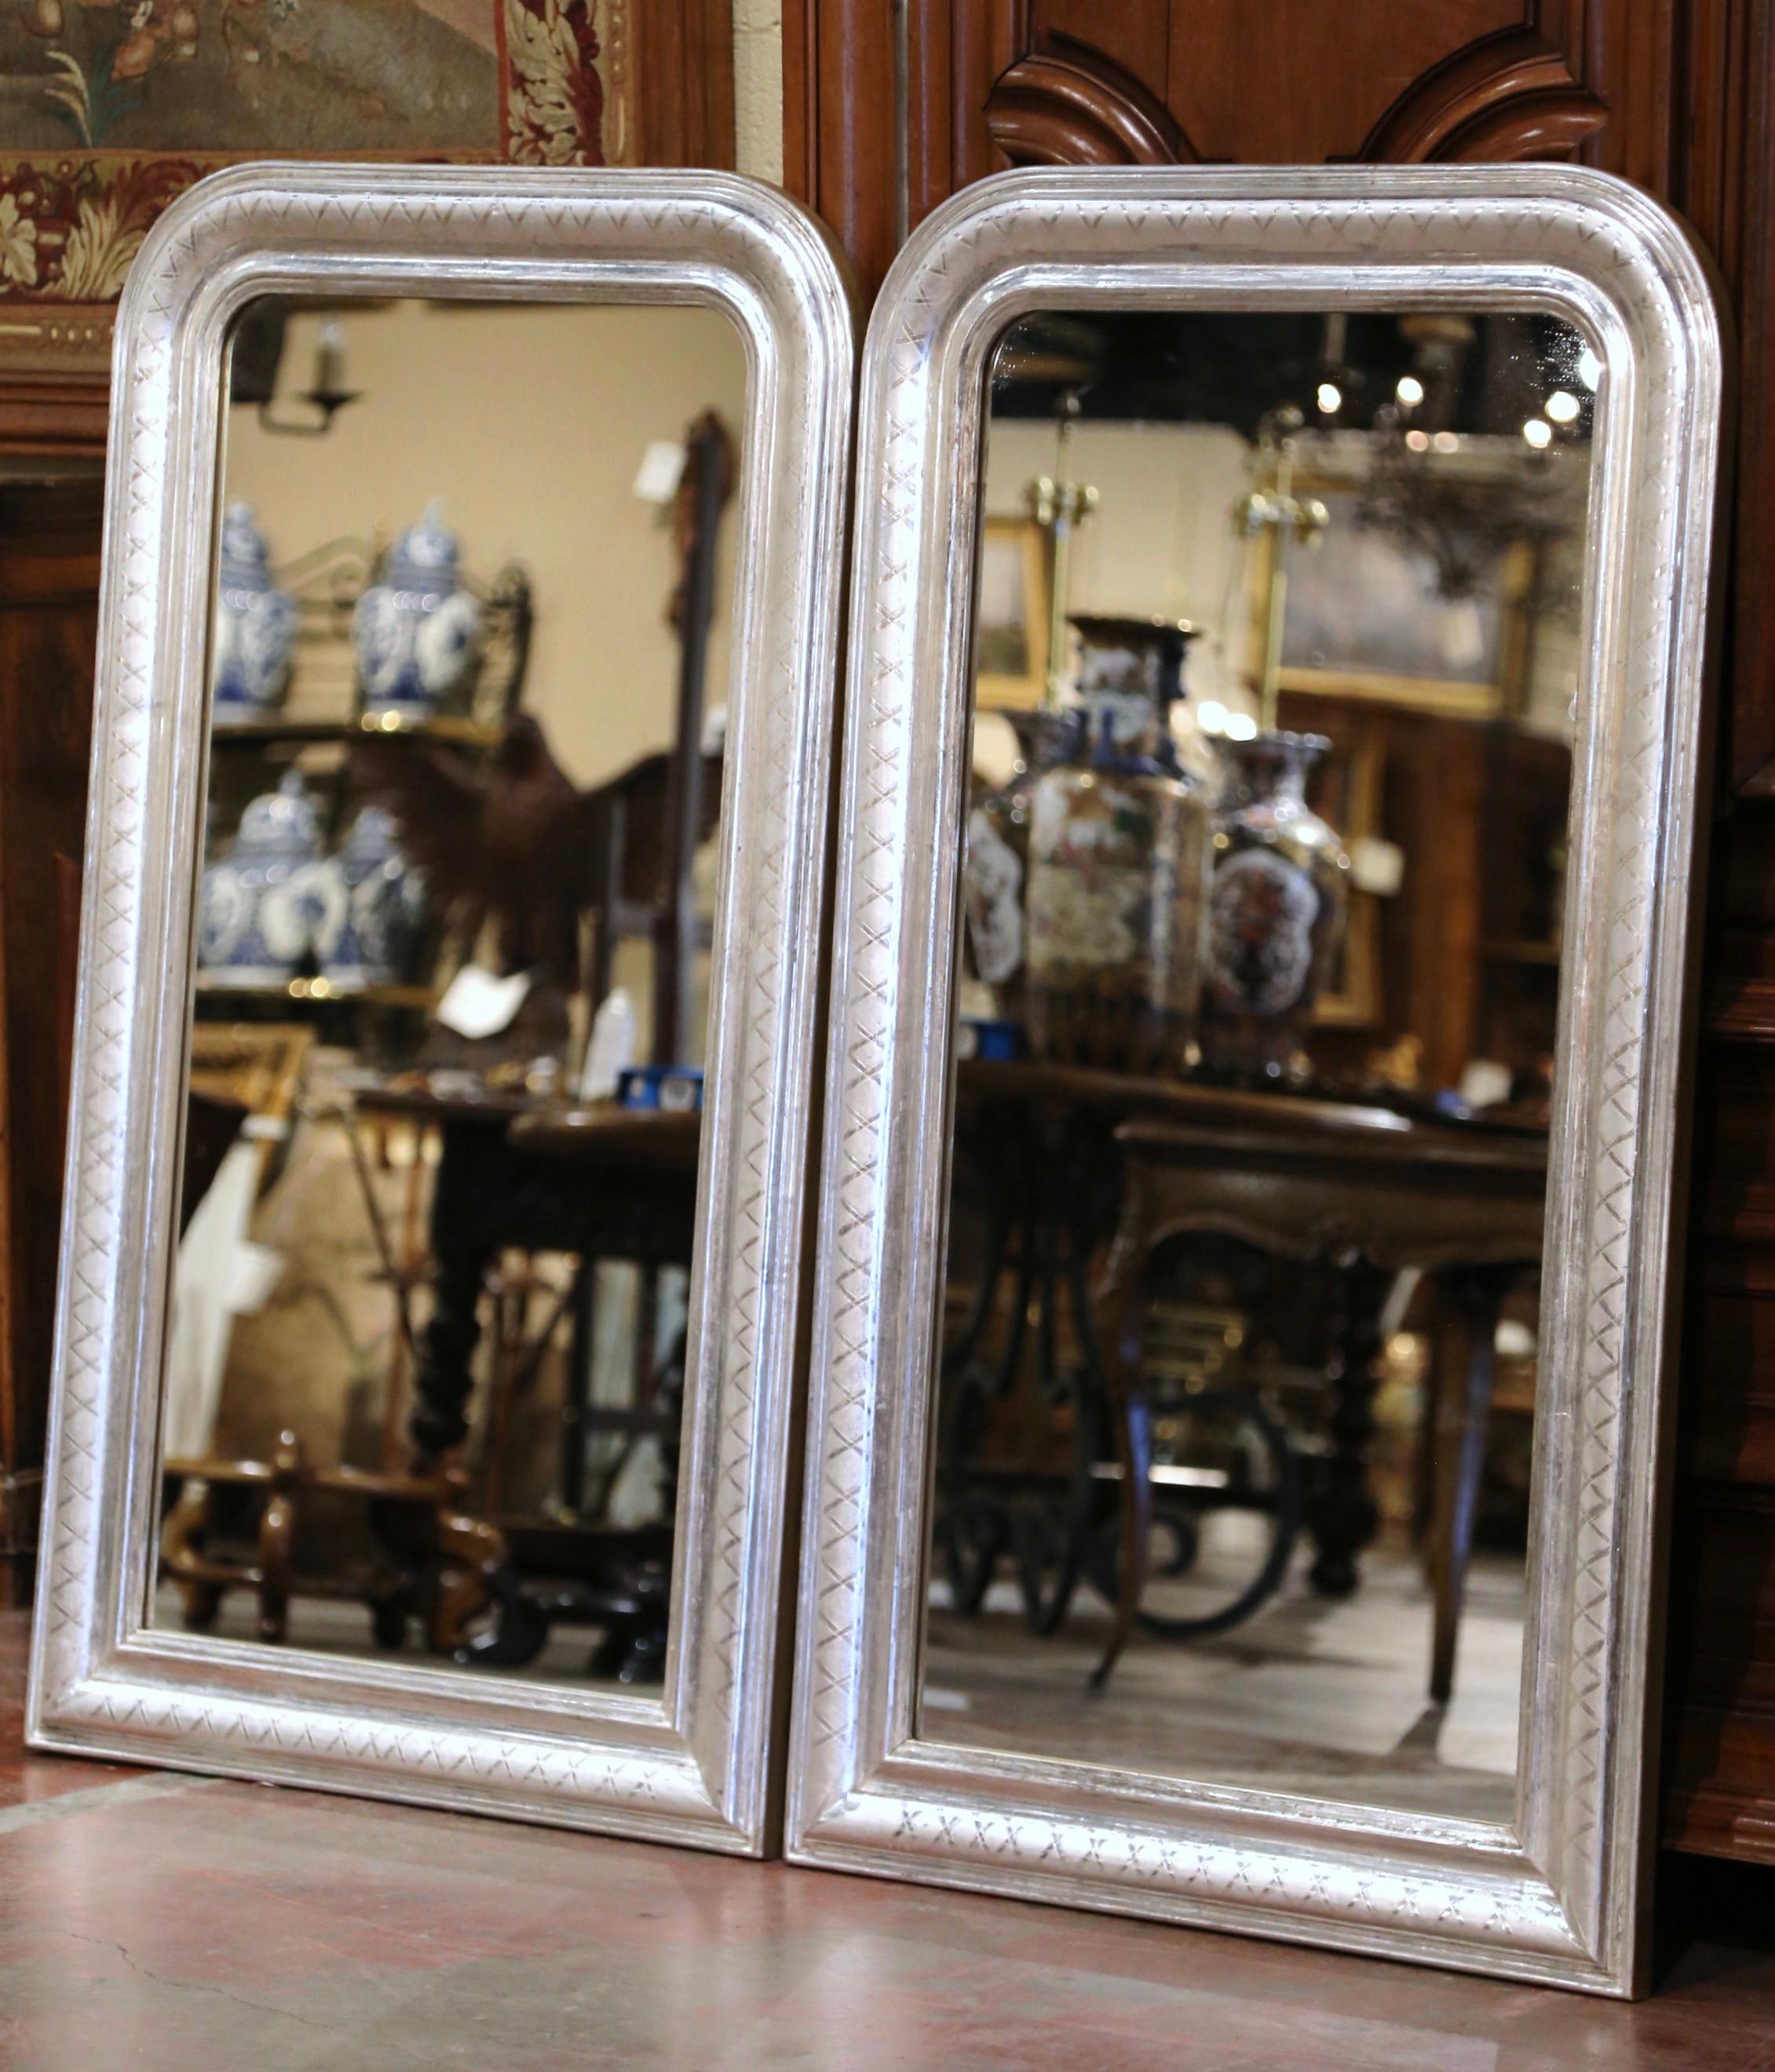 Decorate a master bathroom or entry with this elegant pair of antique wall mirrors. Crafted in the Burgundy region of France, circa 1950, and rectangular in shape, the mirrors have traditional, timeless lines with rounded corners. The frames are